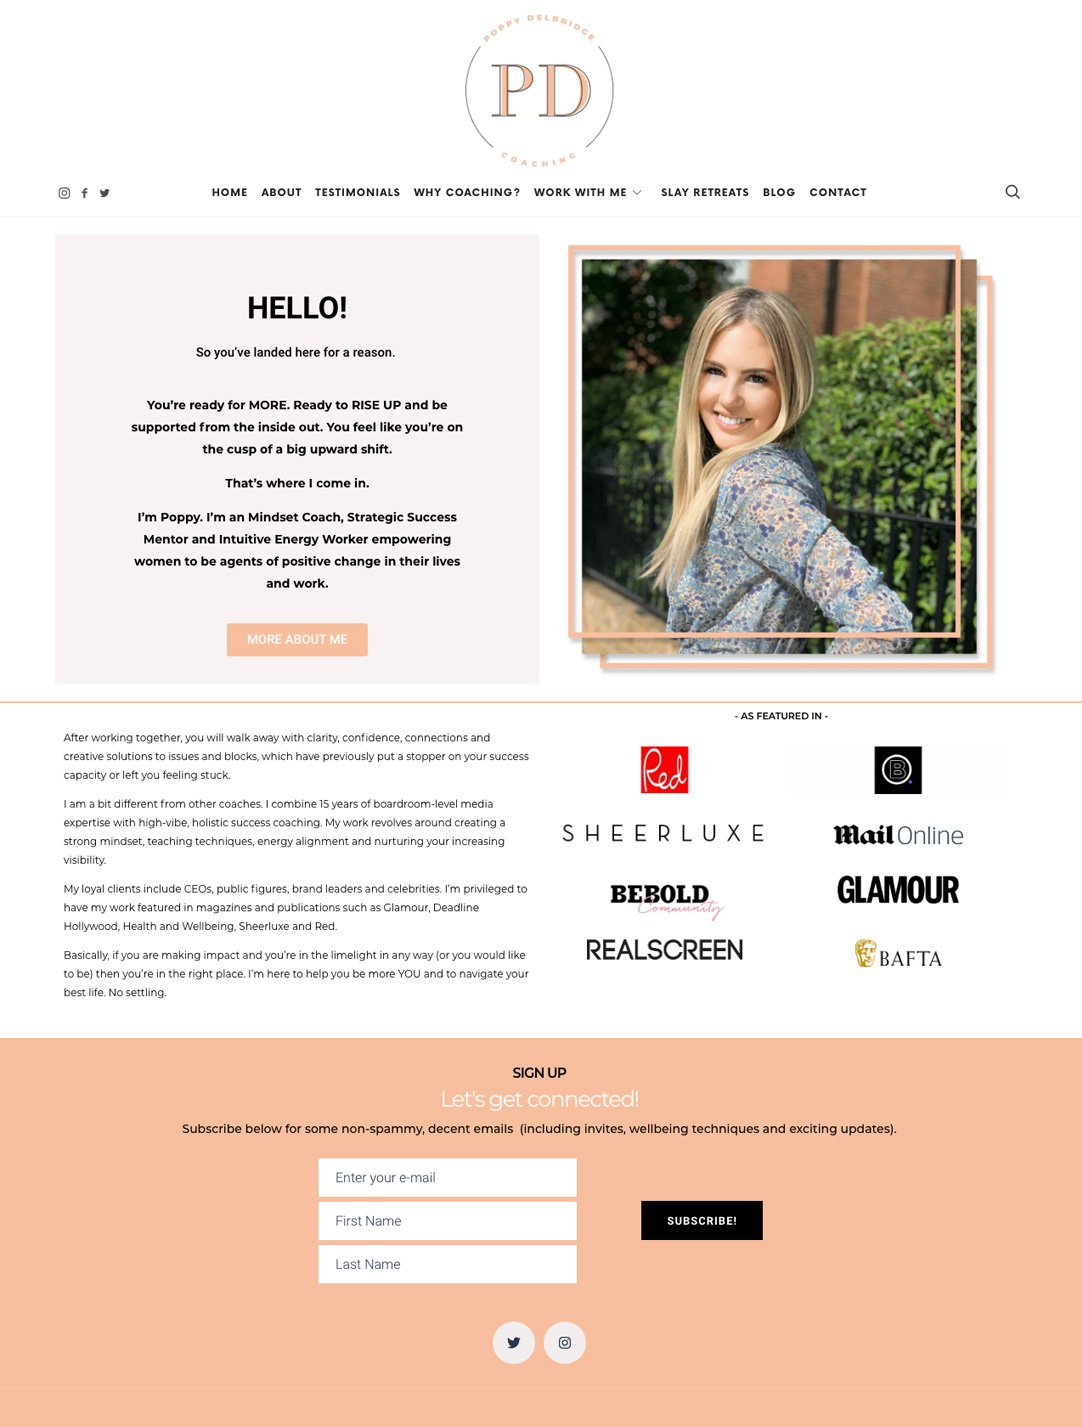 expert brand and website design helping overwhelmed professional women attract their dream clients